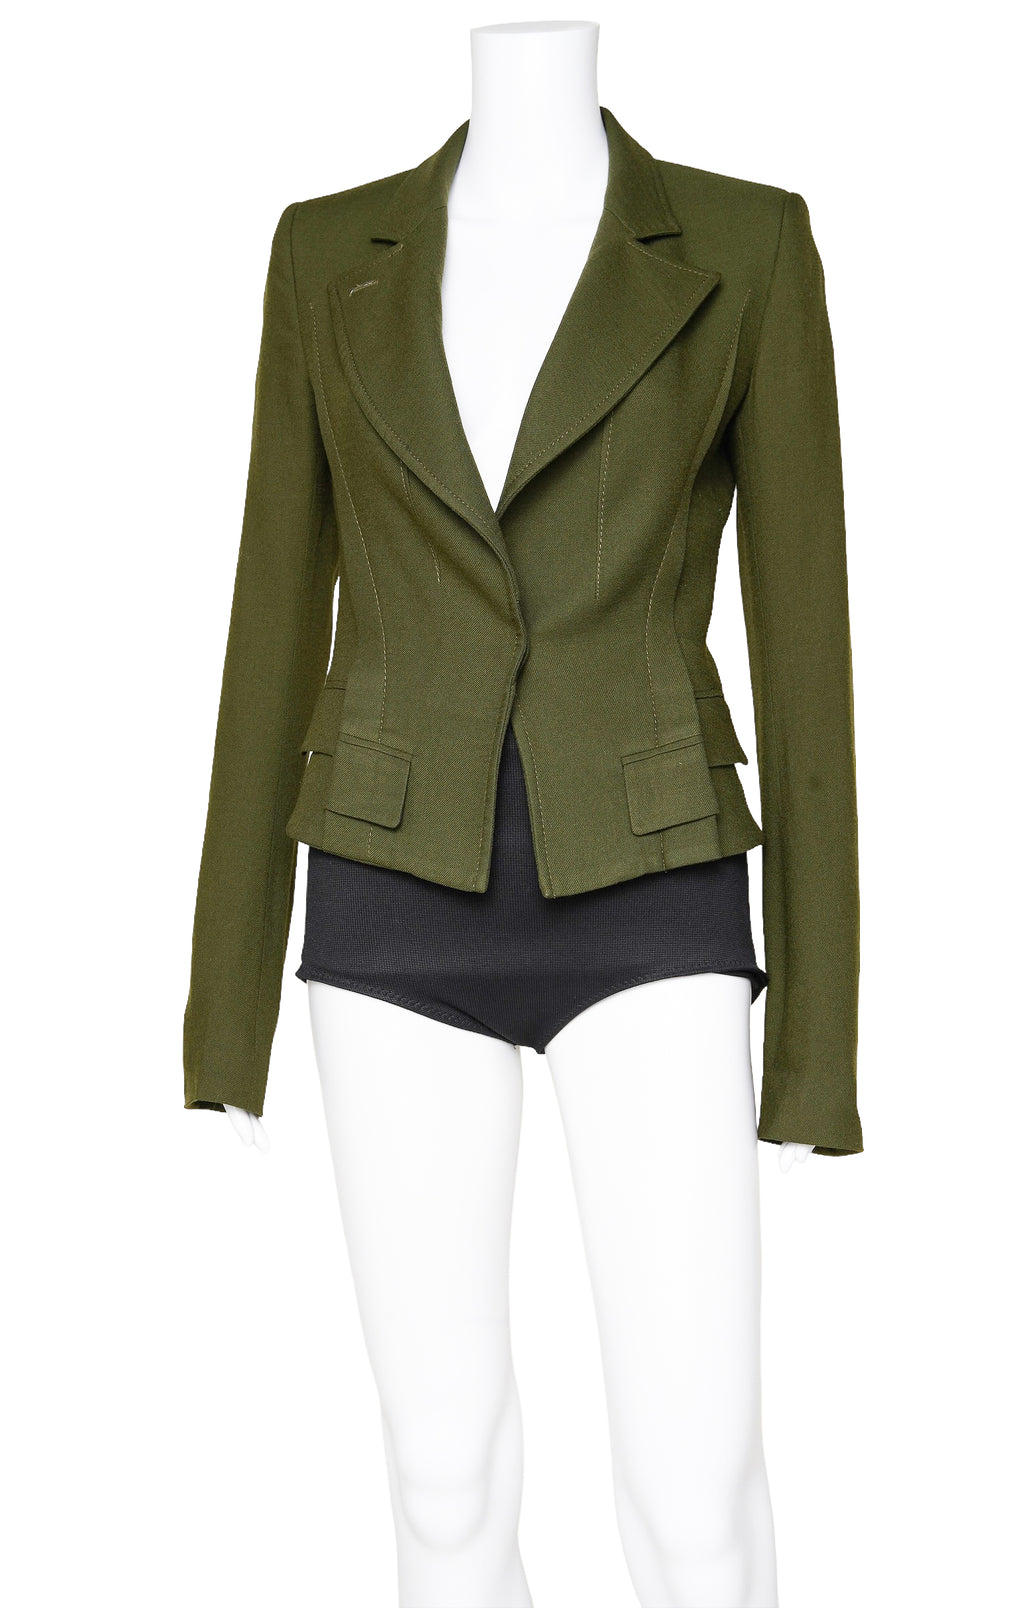 HAIDER ACKERMANN Jacket Size: FR 34 / Comparable to US 0-2